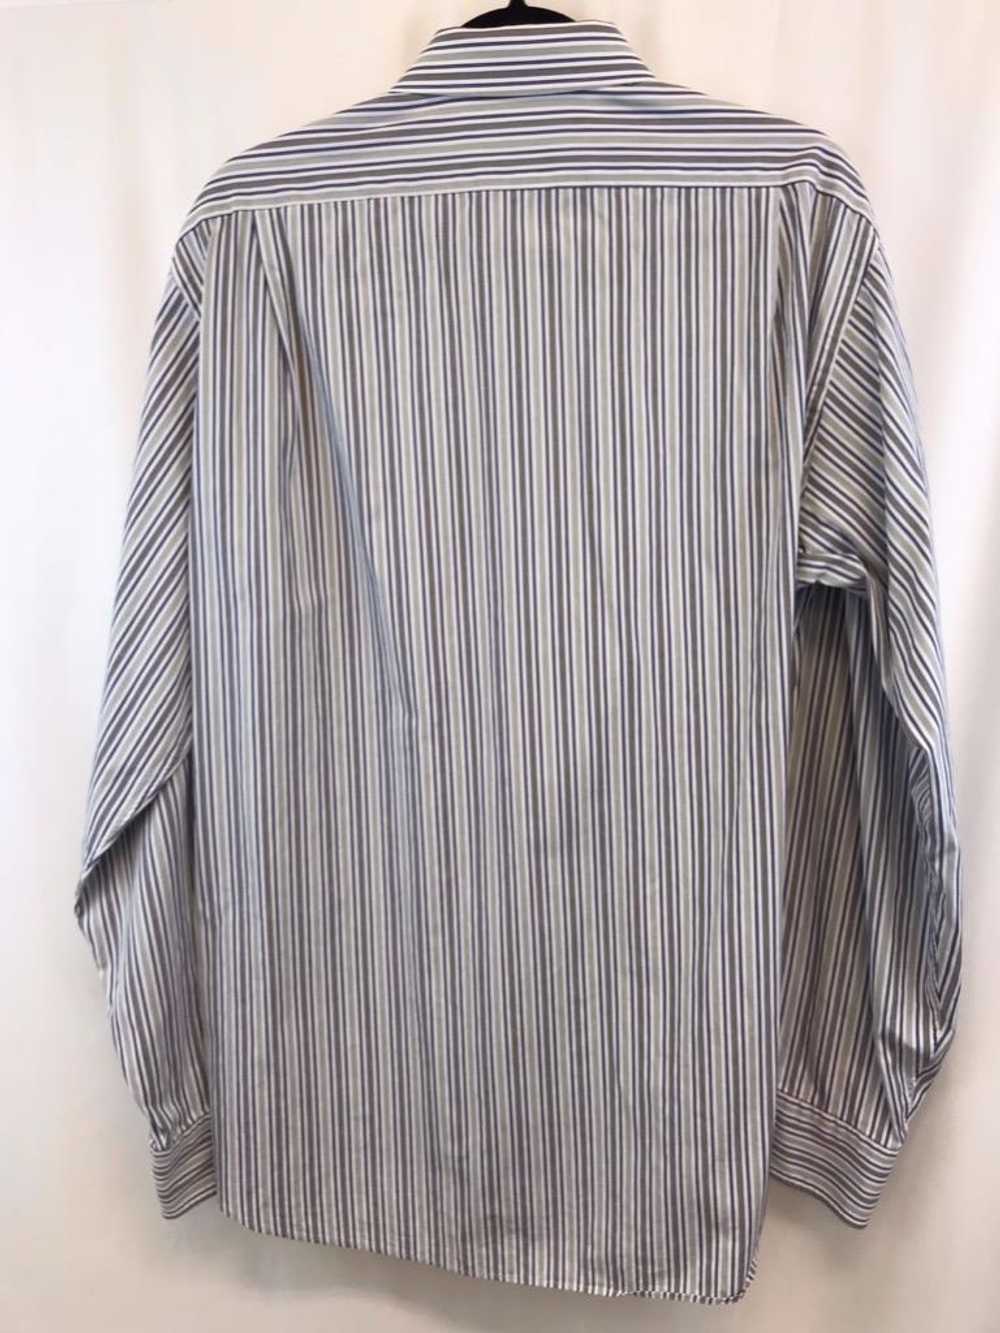 Faconnable Men's Green & Blue Striped Long Sleeve… - image 4